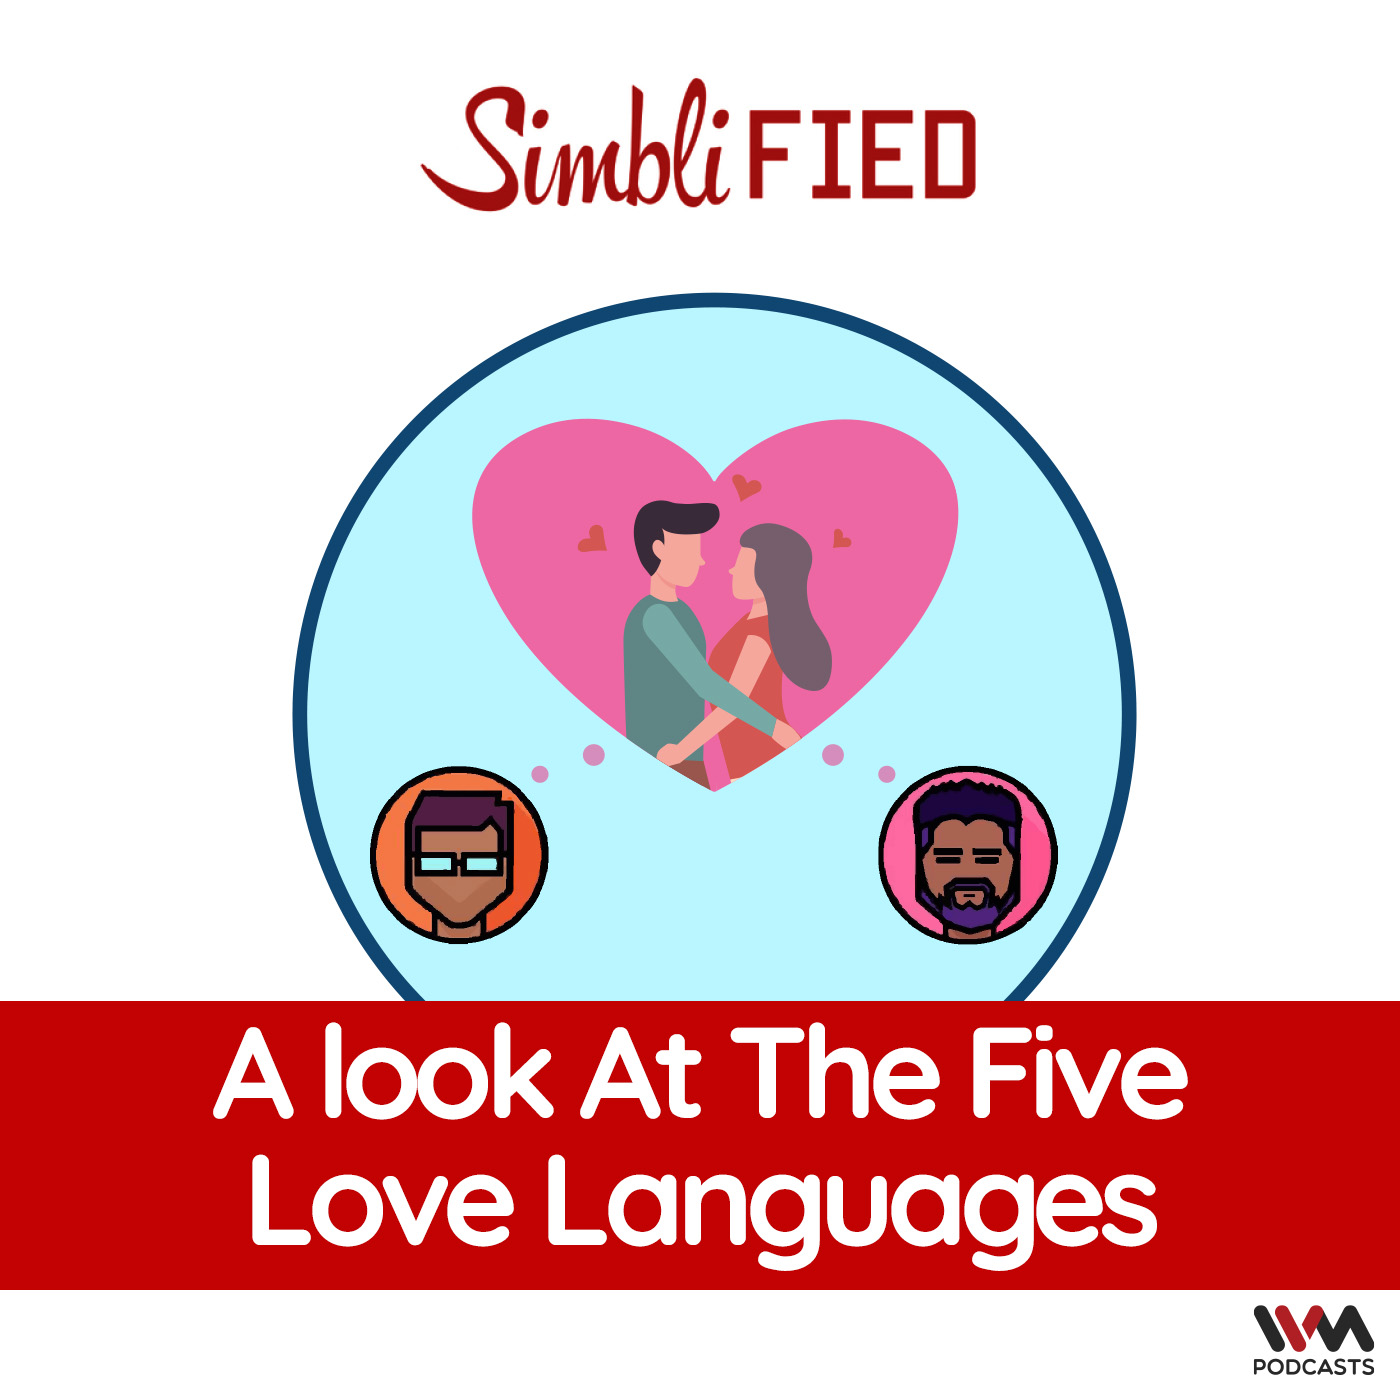 A Simblified look at the Five Love Languages